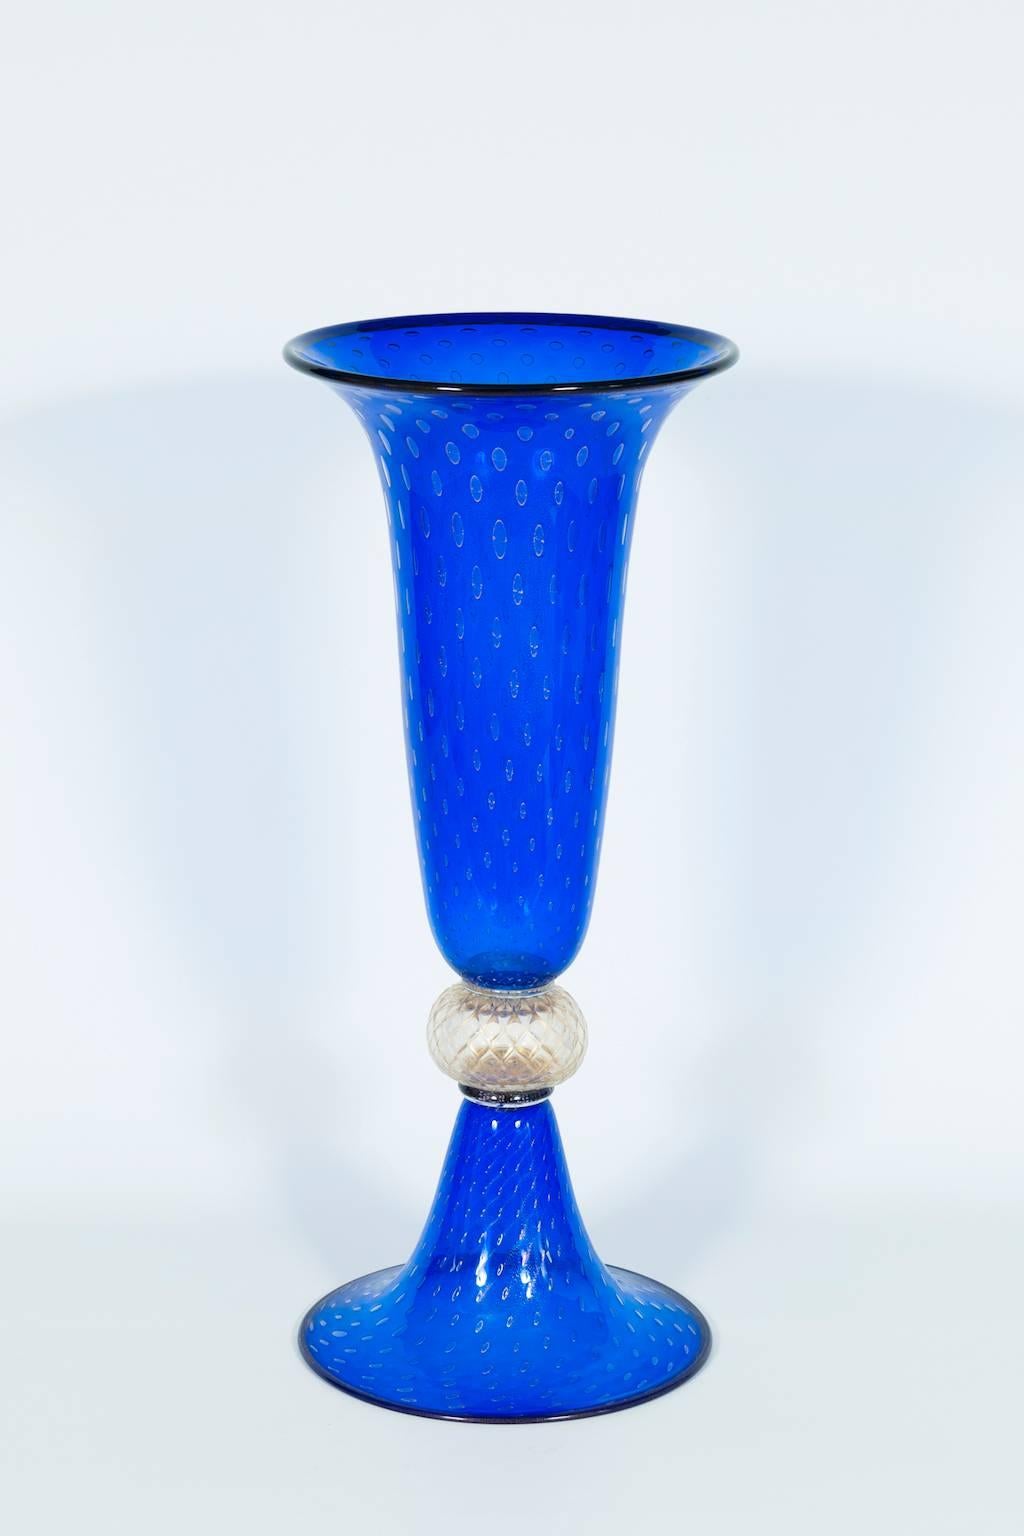 Giant Glass Vase in Murano Glass Blue color and Gold finishes Italy 1950s.
Amazing Italian Venetian Murano glass vase in blue and gold, composed by a base and a cup in blue color with gold bubbles submerged and within the middle a gold sphere.